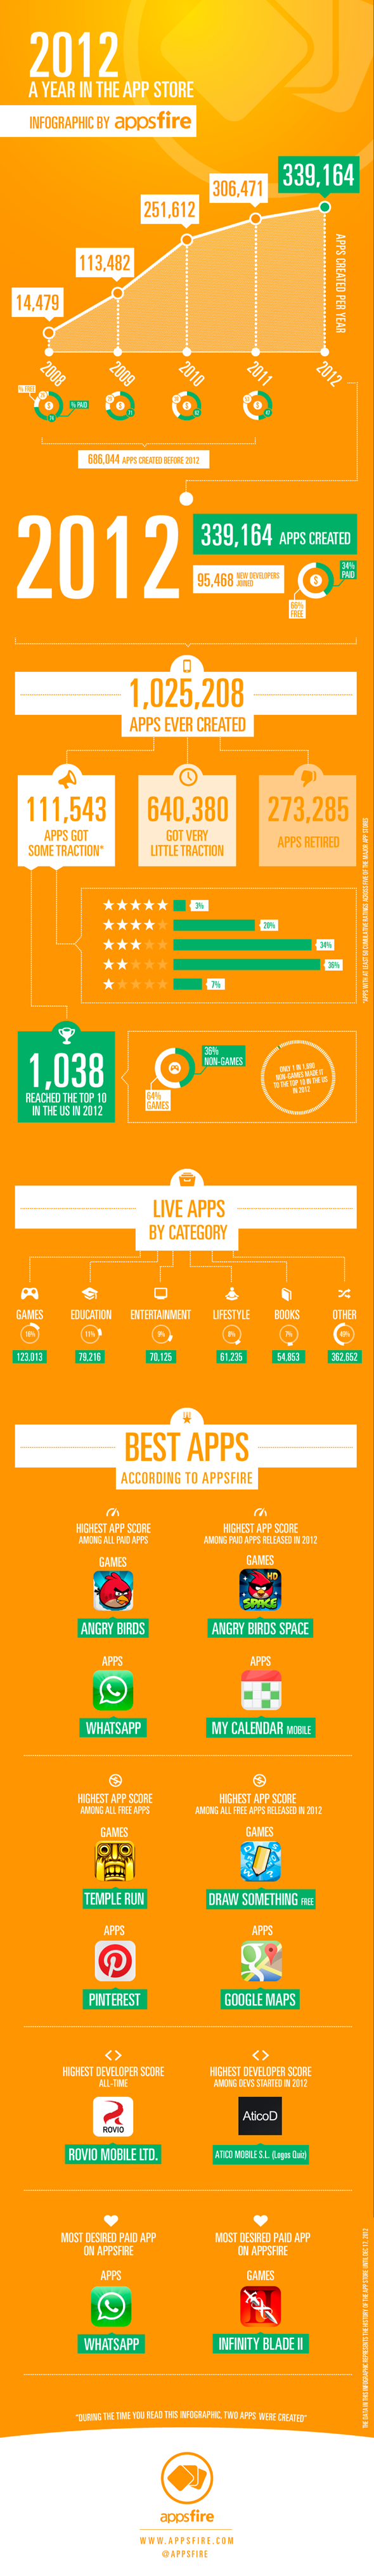 Appsfire-2012-A-Year-in-the-App-Store1